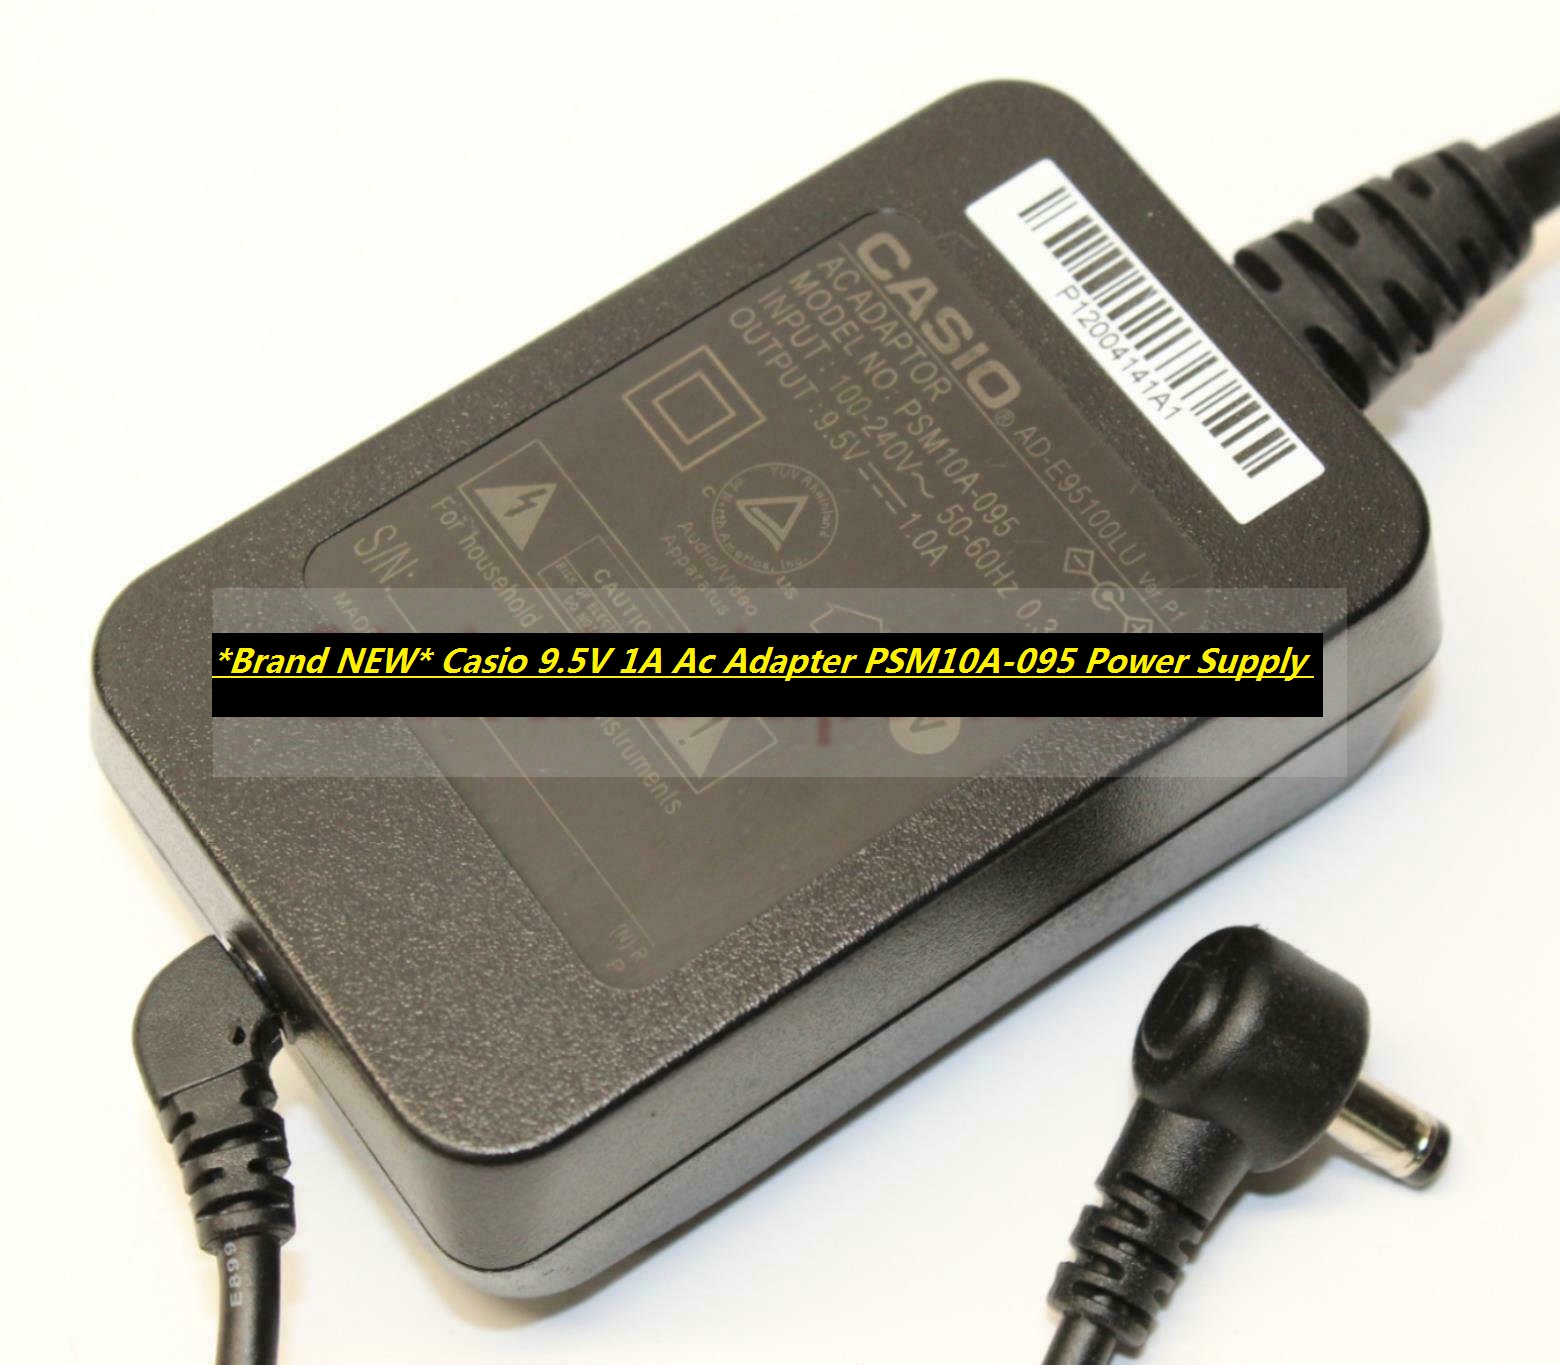 *Brand NEW* Casio 9.5V 1A Ac Adapter PSM10A-095 Power Supply - Click Image to Close